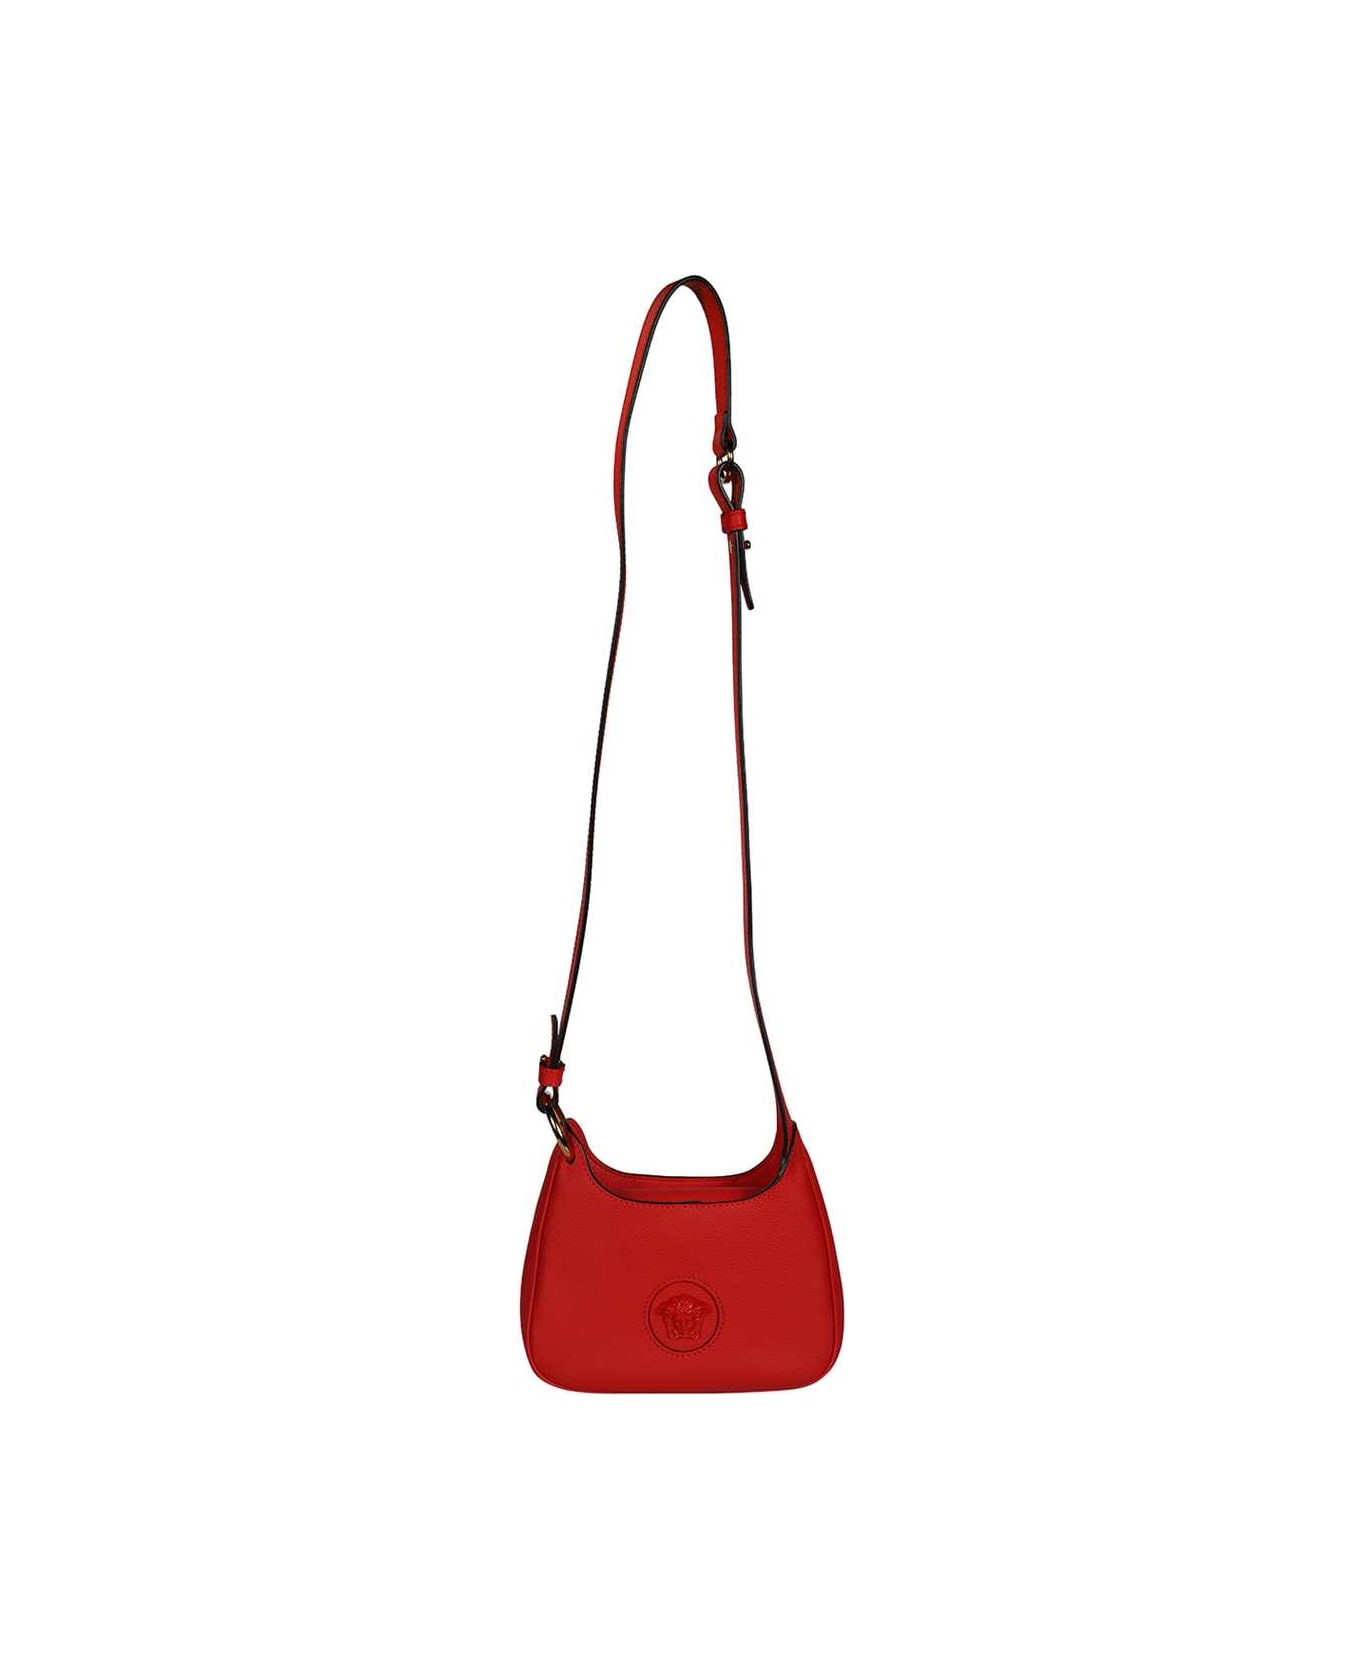 Versace Leather Crossbody Bag - red トートバッグ